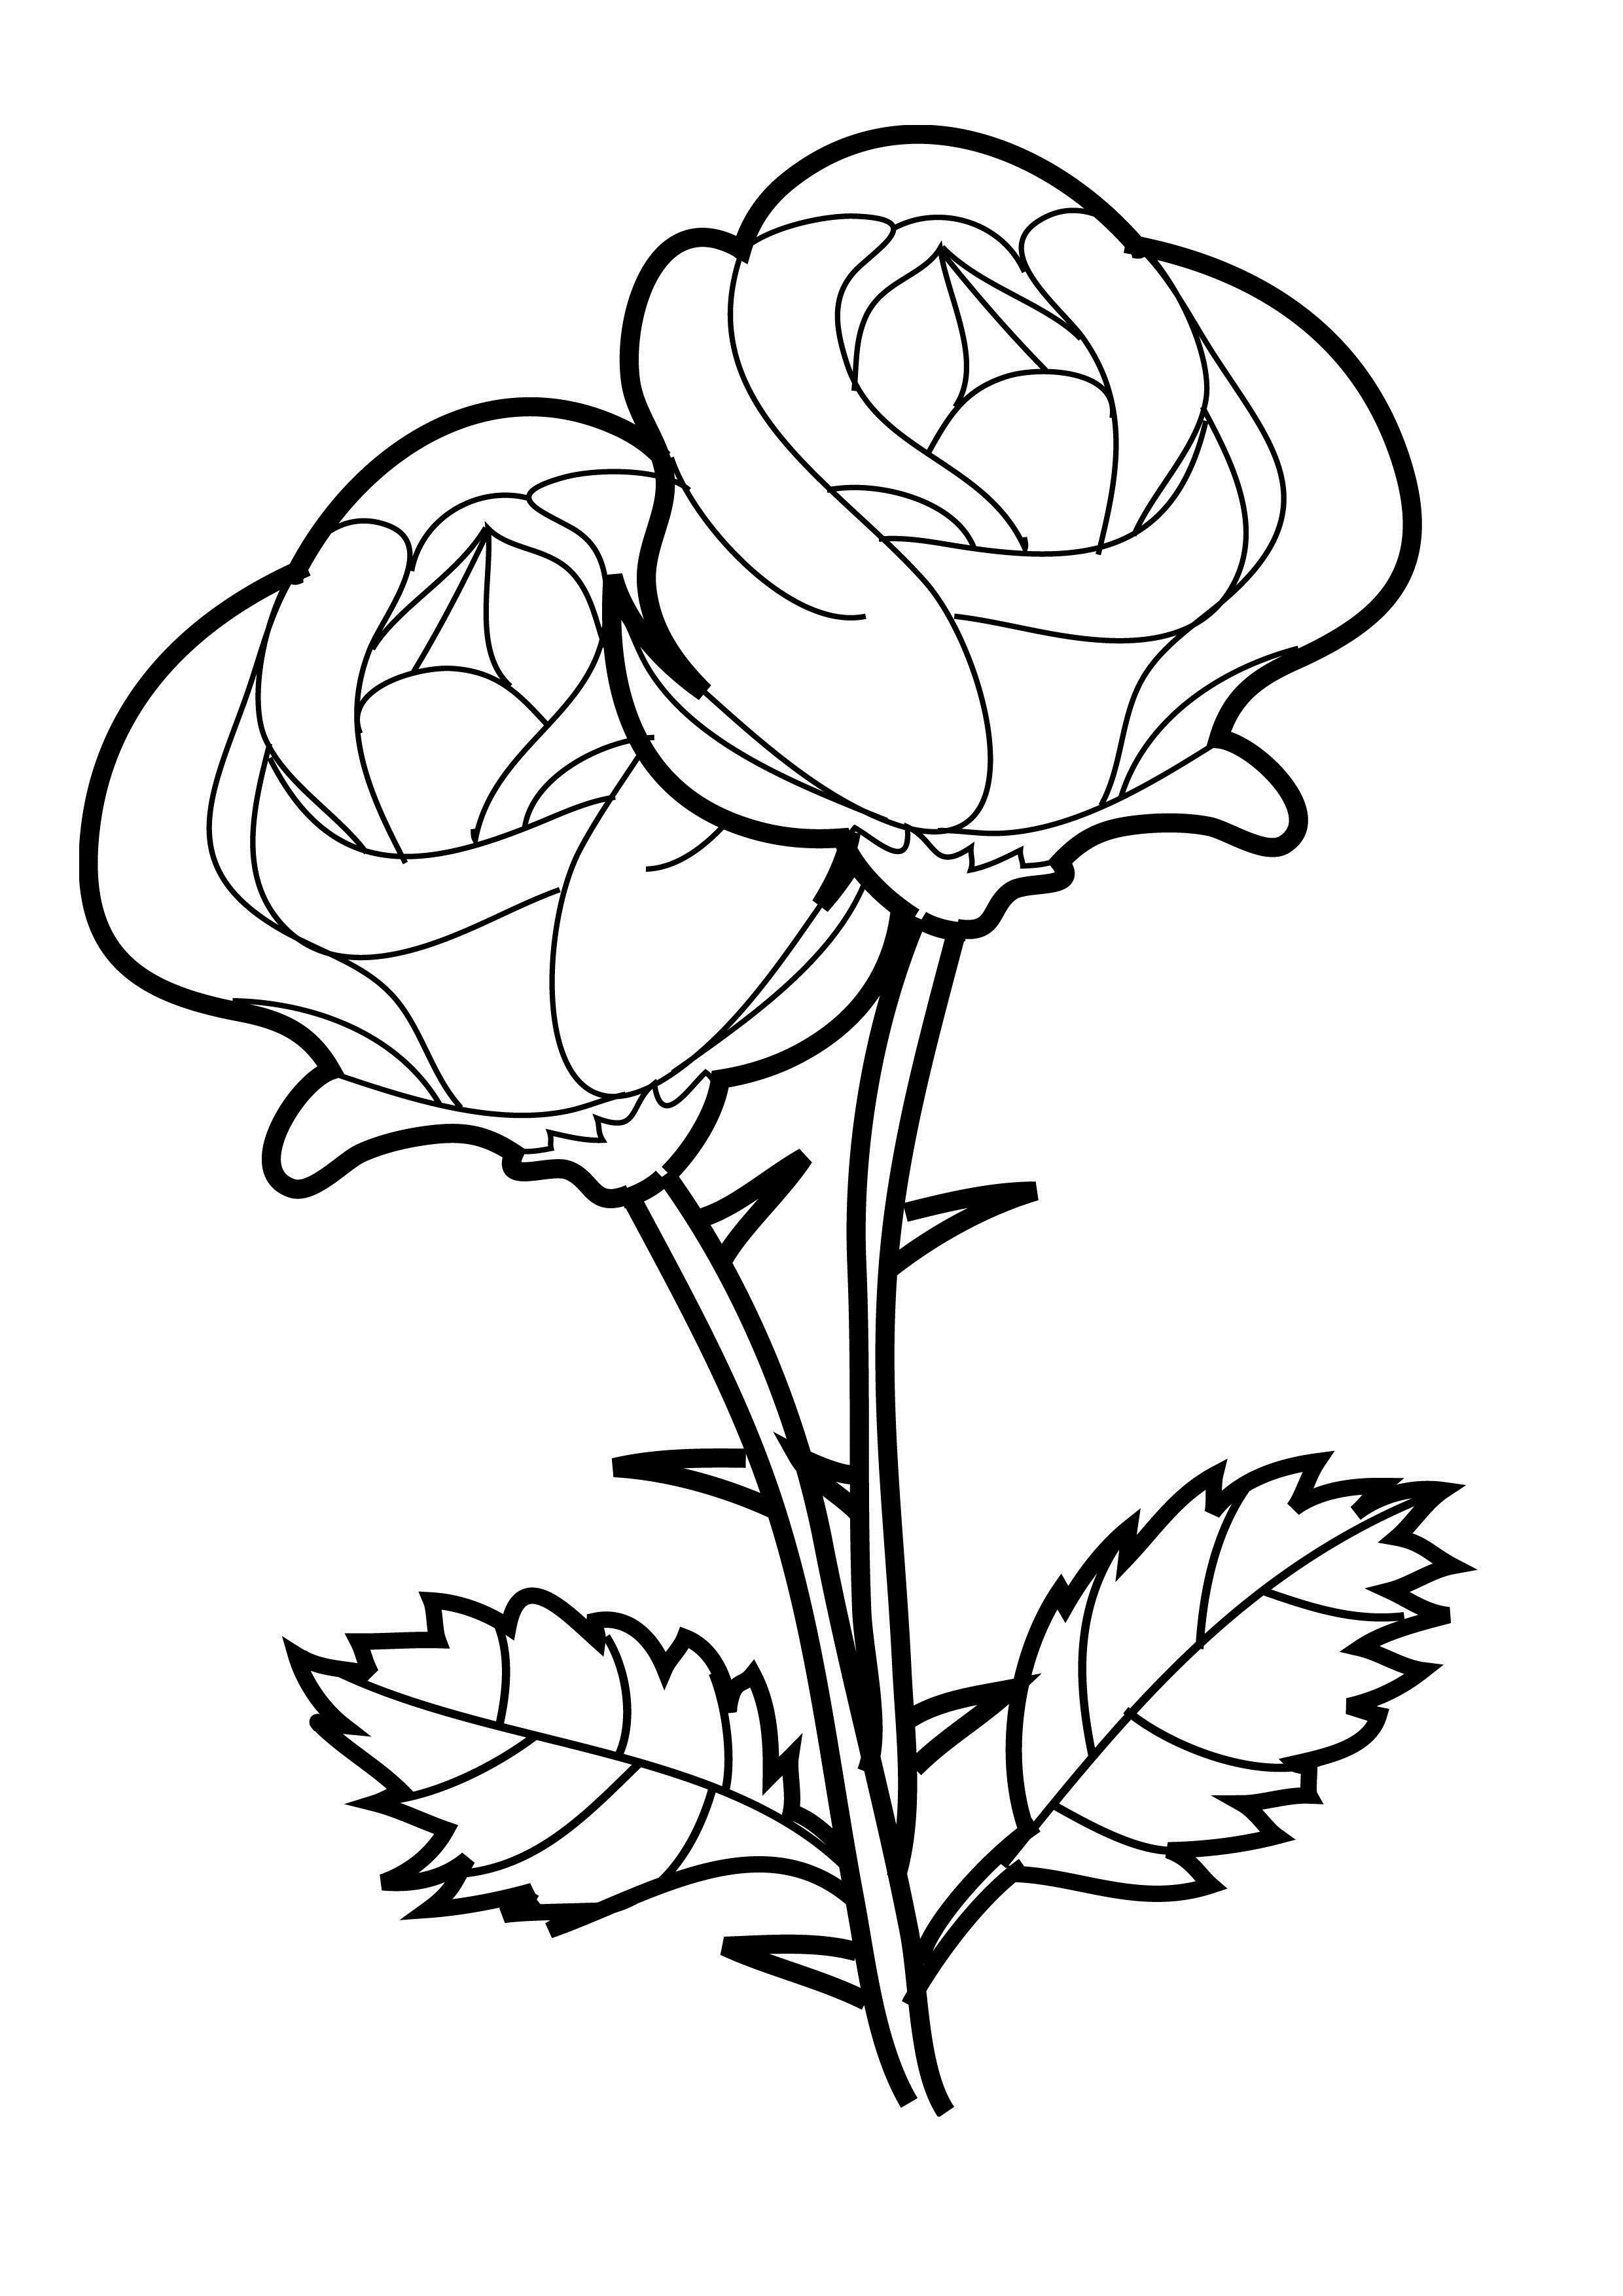 Free Printable Roses Coloring Pages For Kids - Free Printable Roses